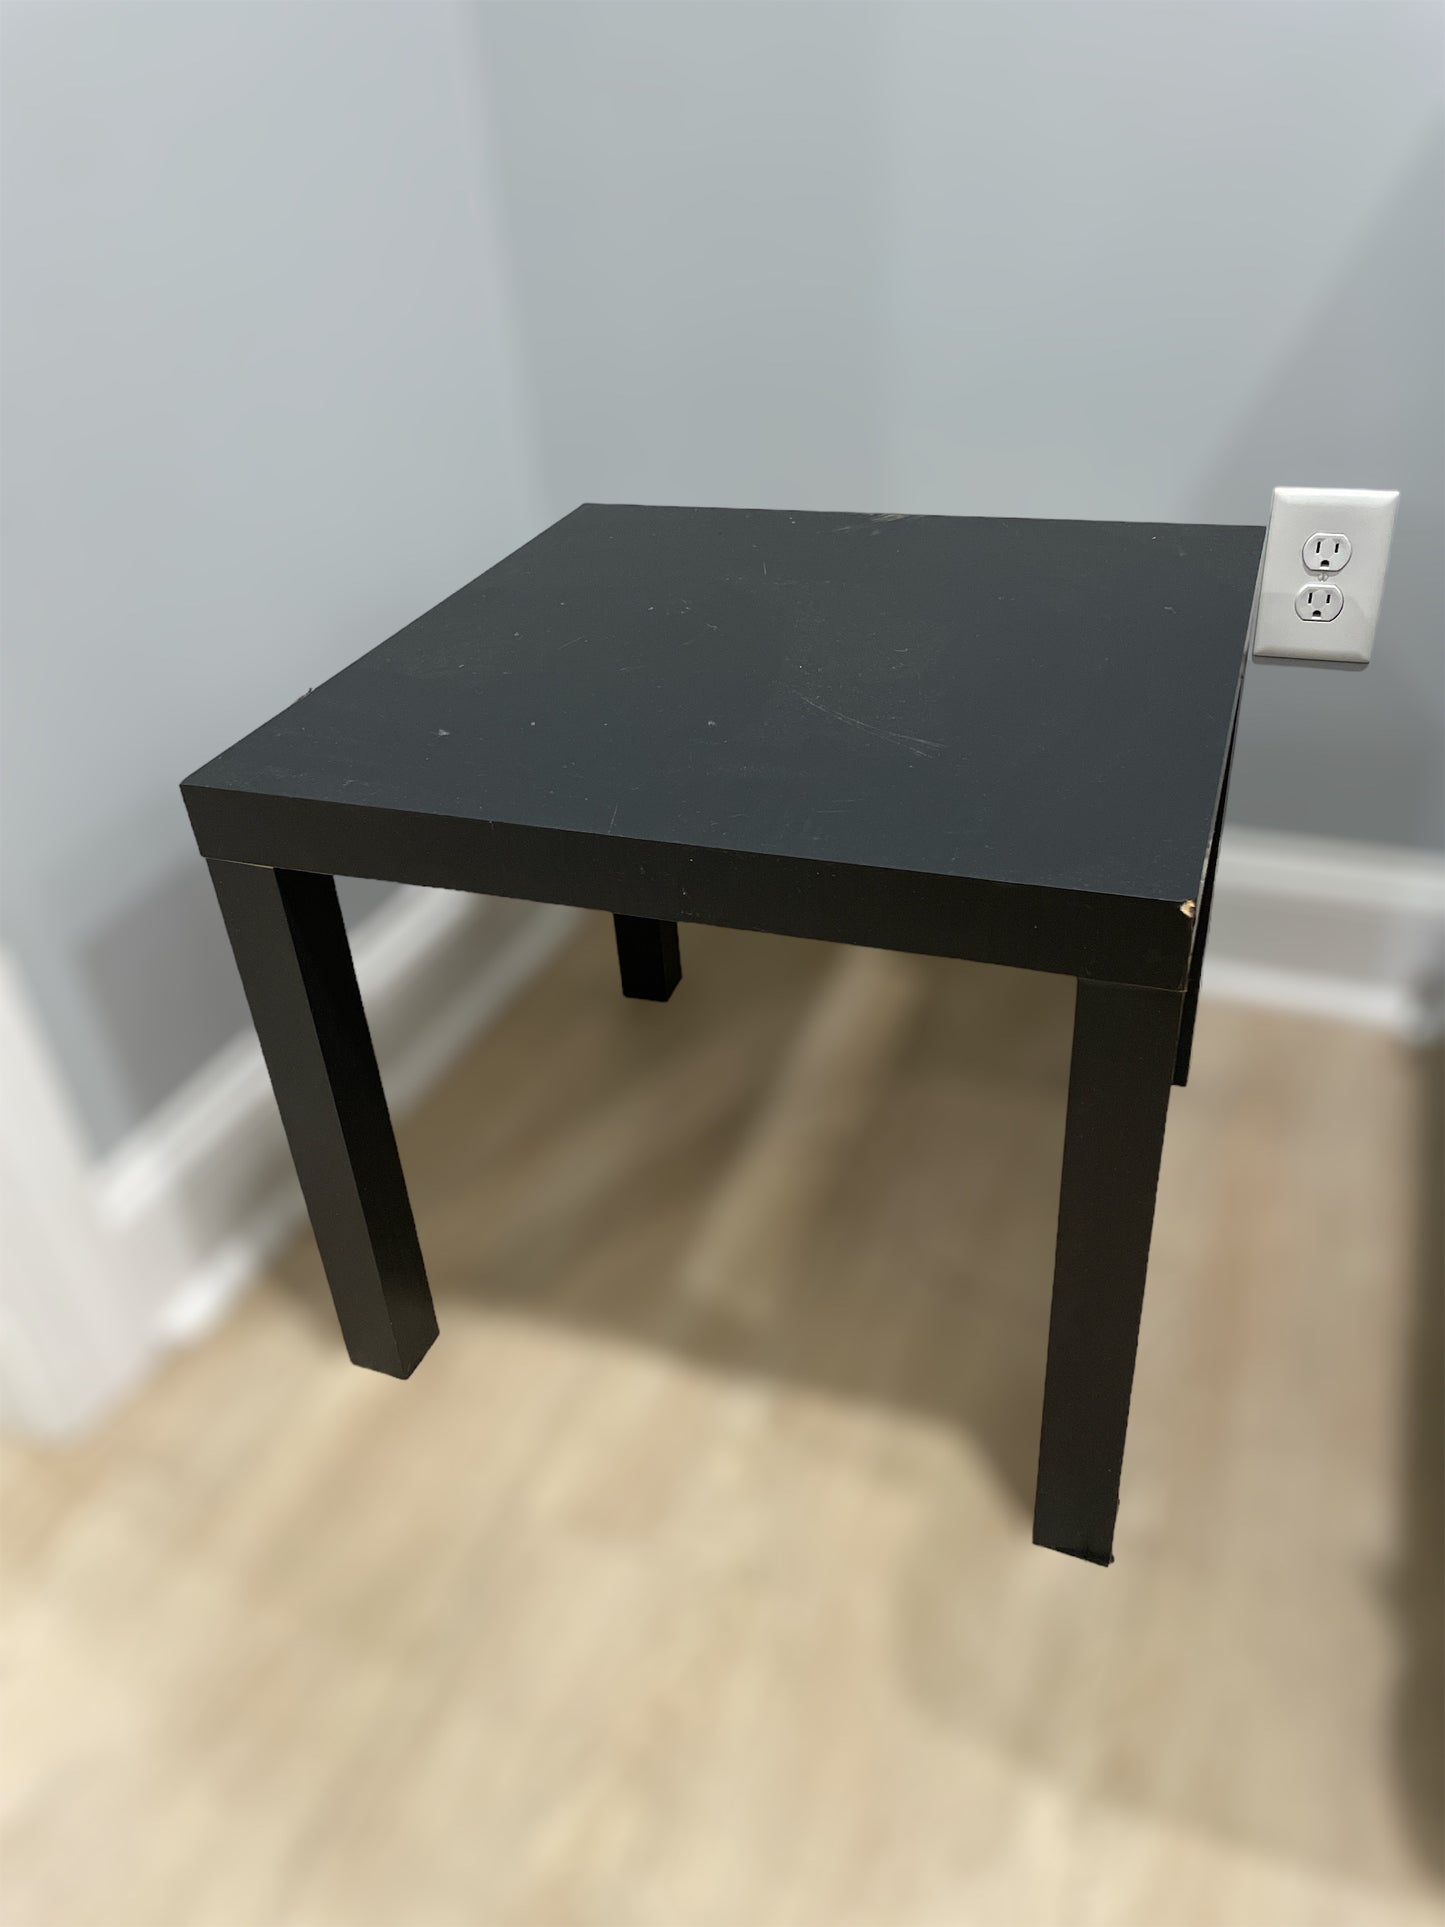 Black Accent Table - Certified Refurbished